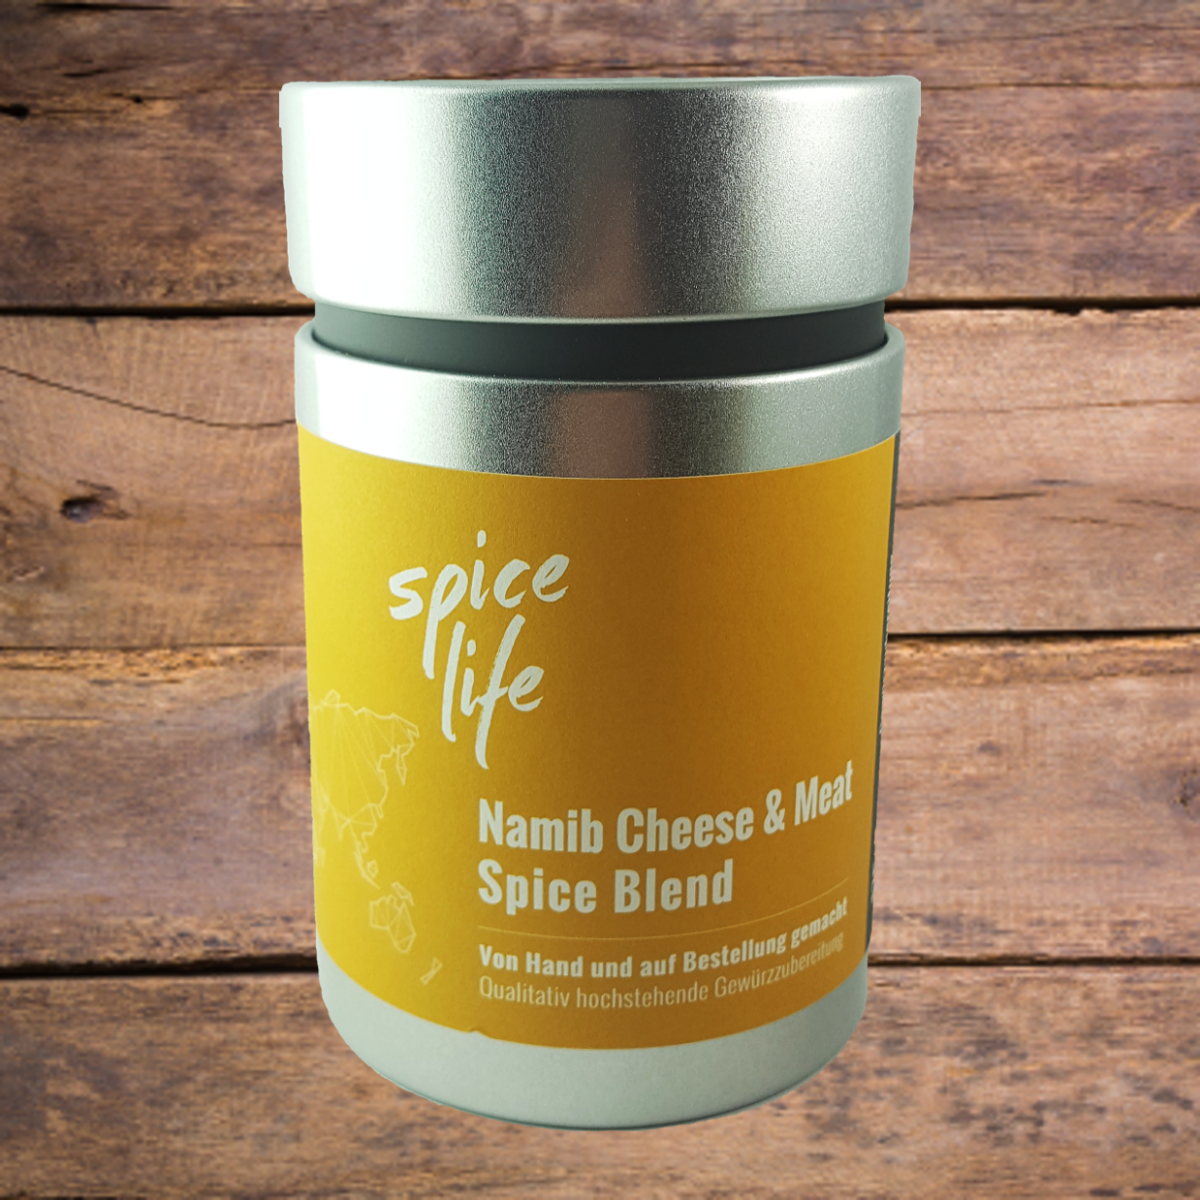 Namib Cheese & Meat Spice Blend